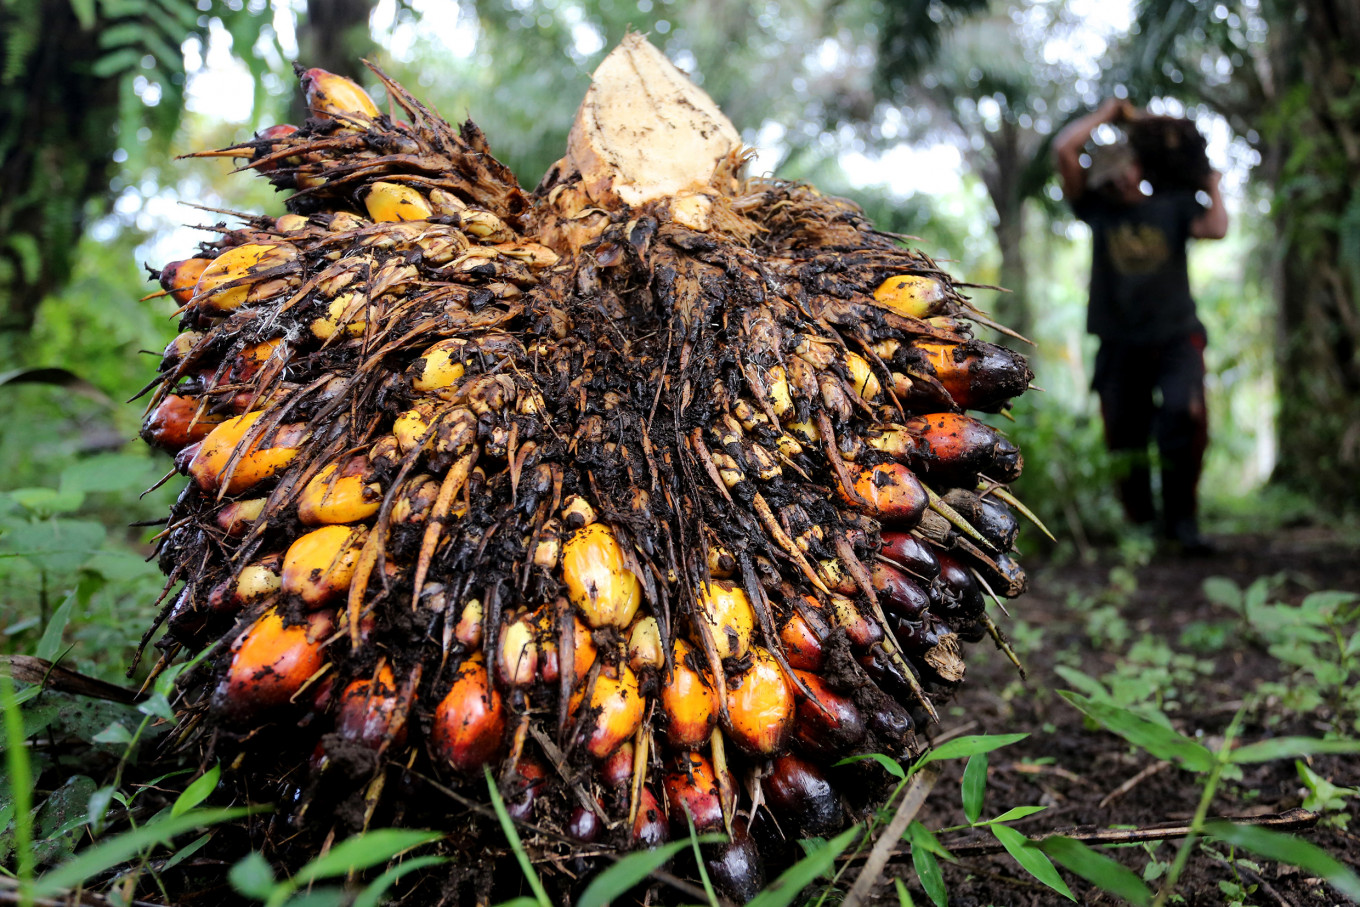 Producers expect palm oil exports to decline by 4 percent this year ...